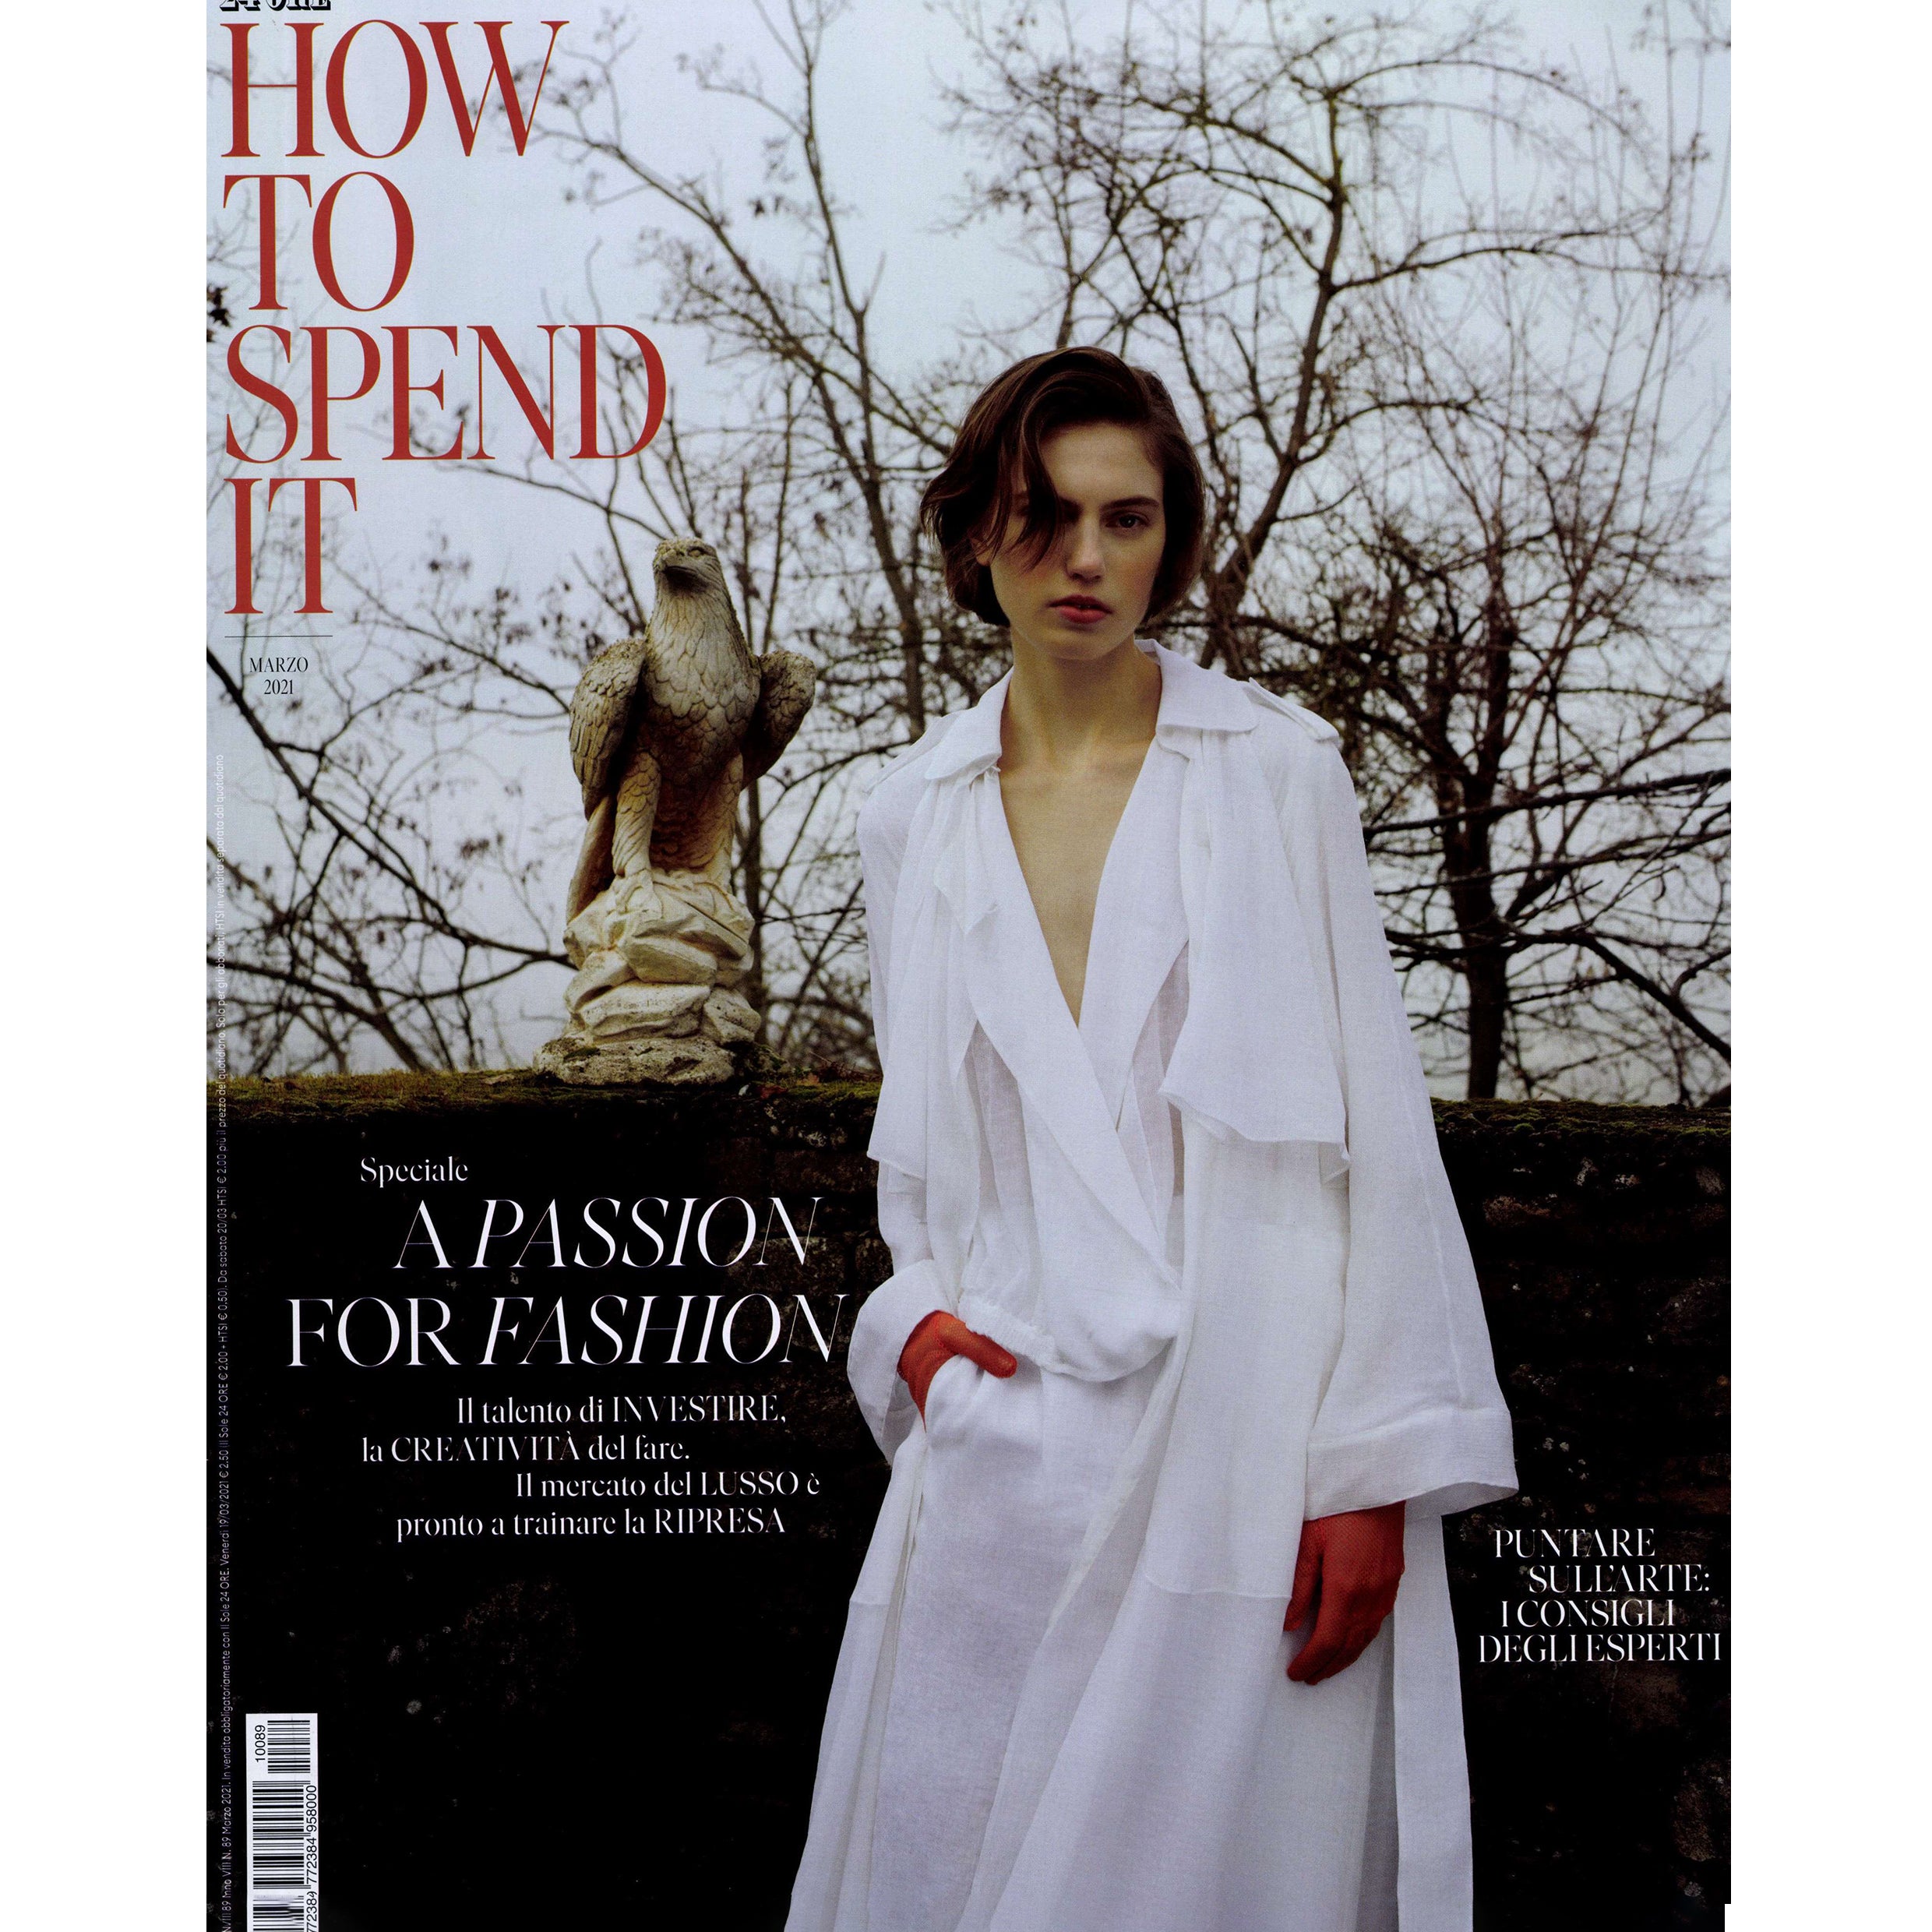 IL SOLE 24 ORE IT - HOW TO SPEND IT